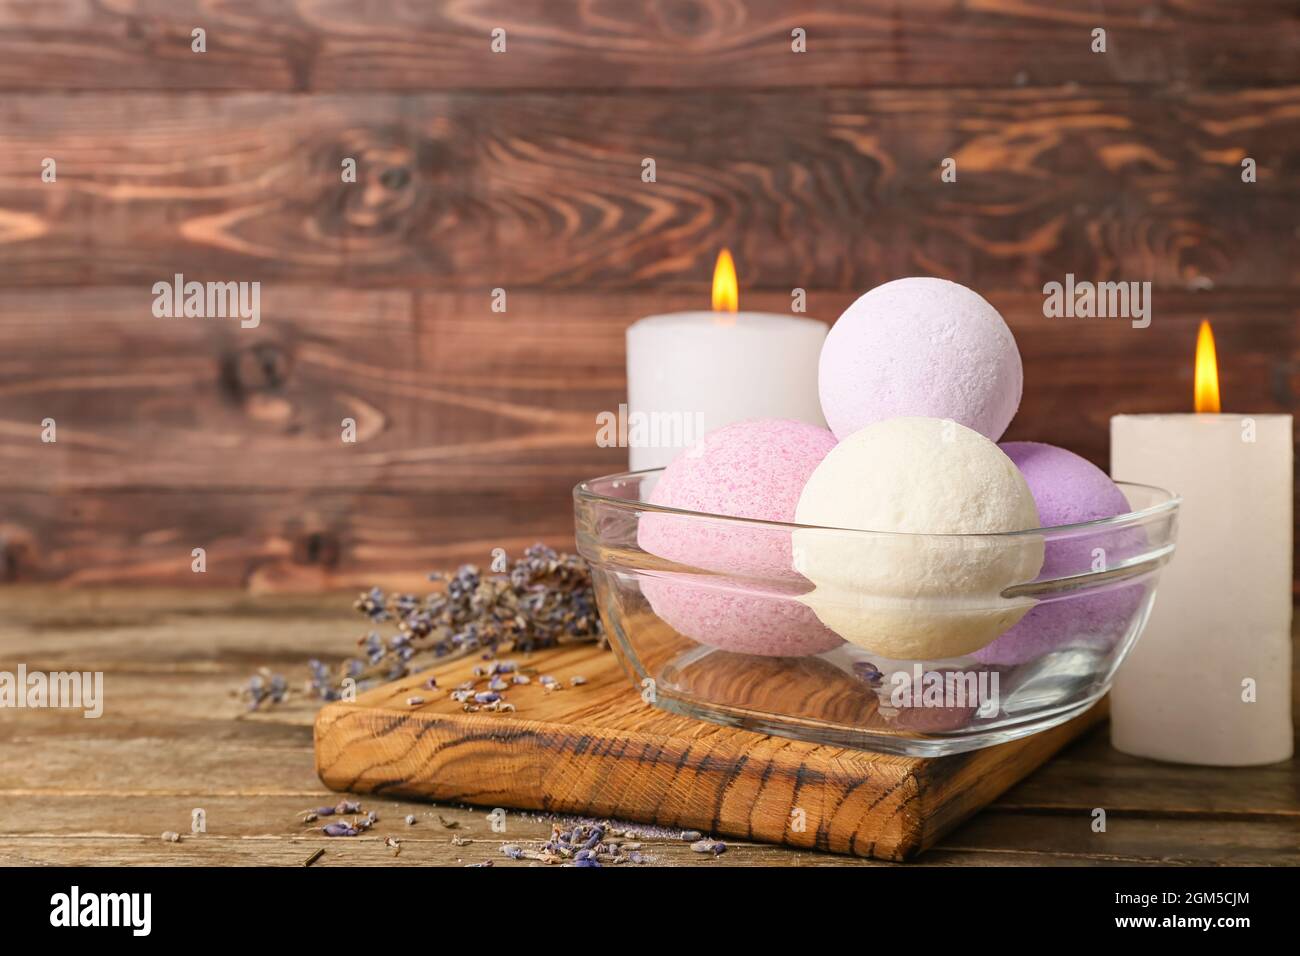 Bowl with lavender bath bombs and burning candles on wooden background Stock Photo